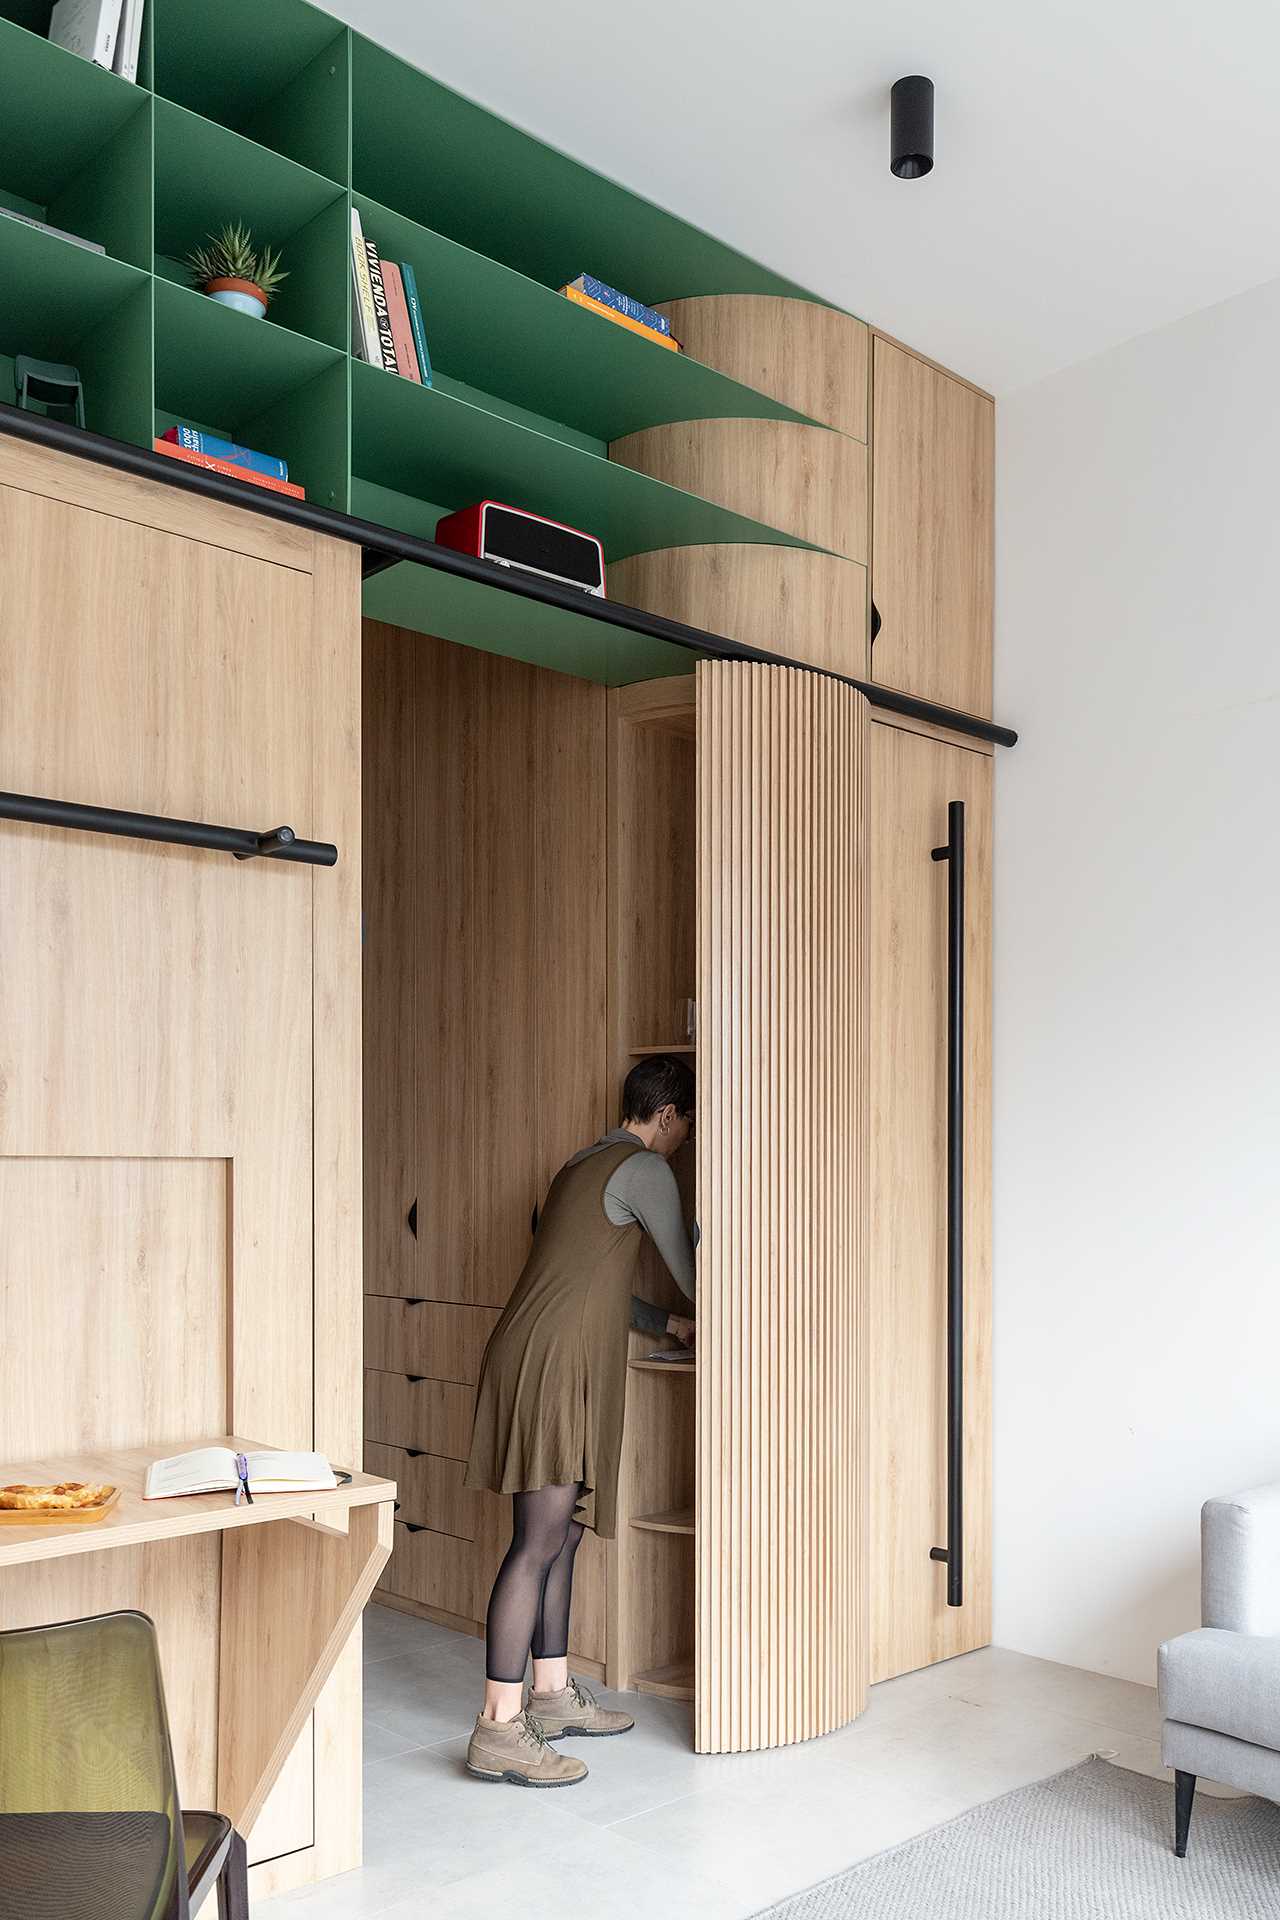 The corner of this small studio apartment has been softened with a curved cabinet that opens to shelving.